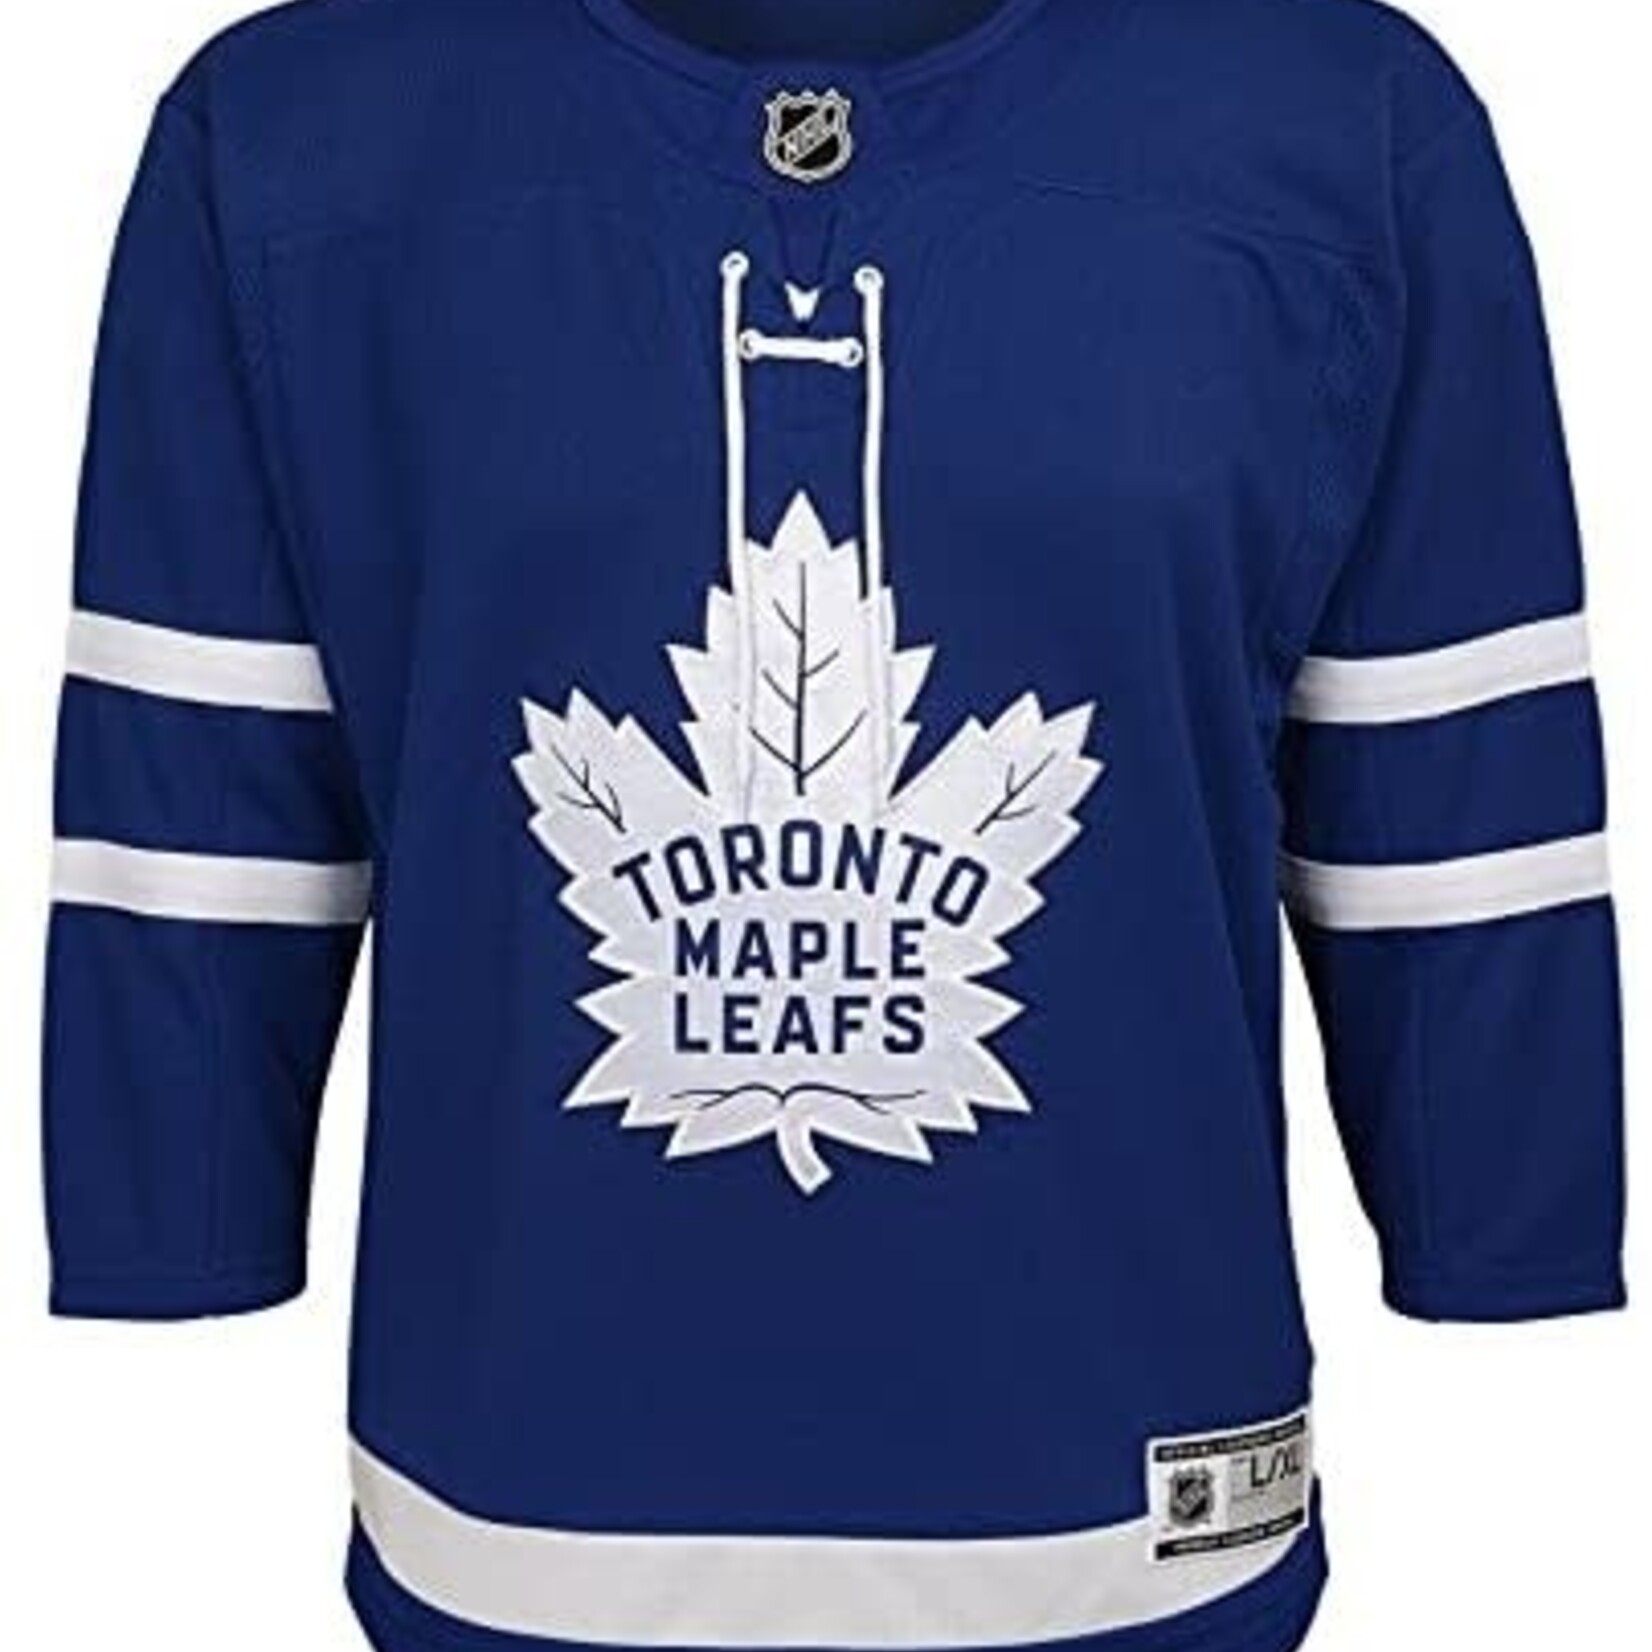 Outerstuff Outerstuff Hockey Jersey, Replica, Home, NHL, Infant, Toronto Maple Leafs 18M